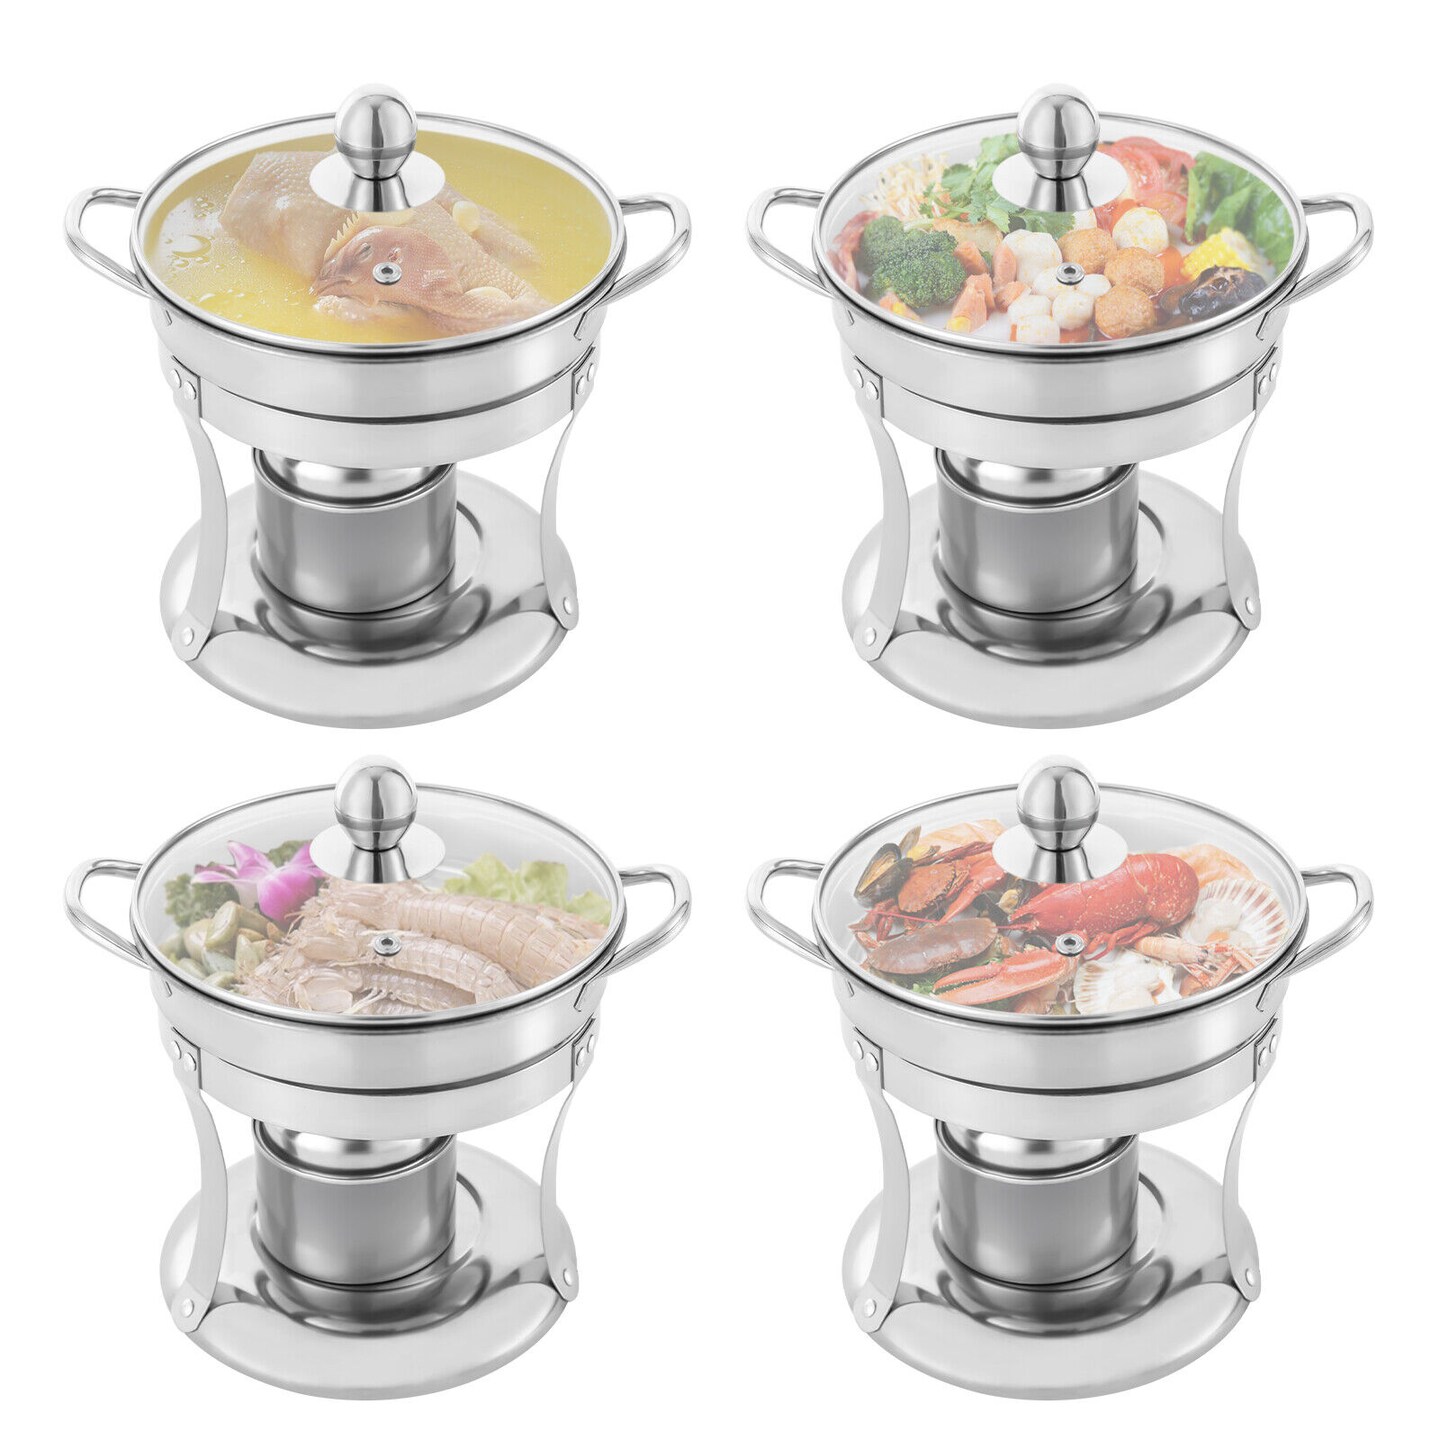 4Pack Chafing Dish with Food Warmer Set